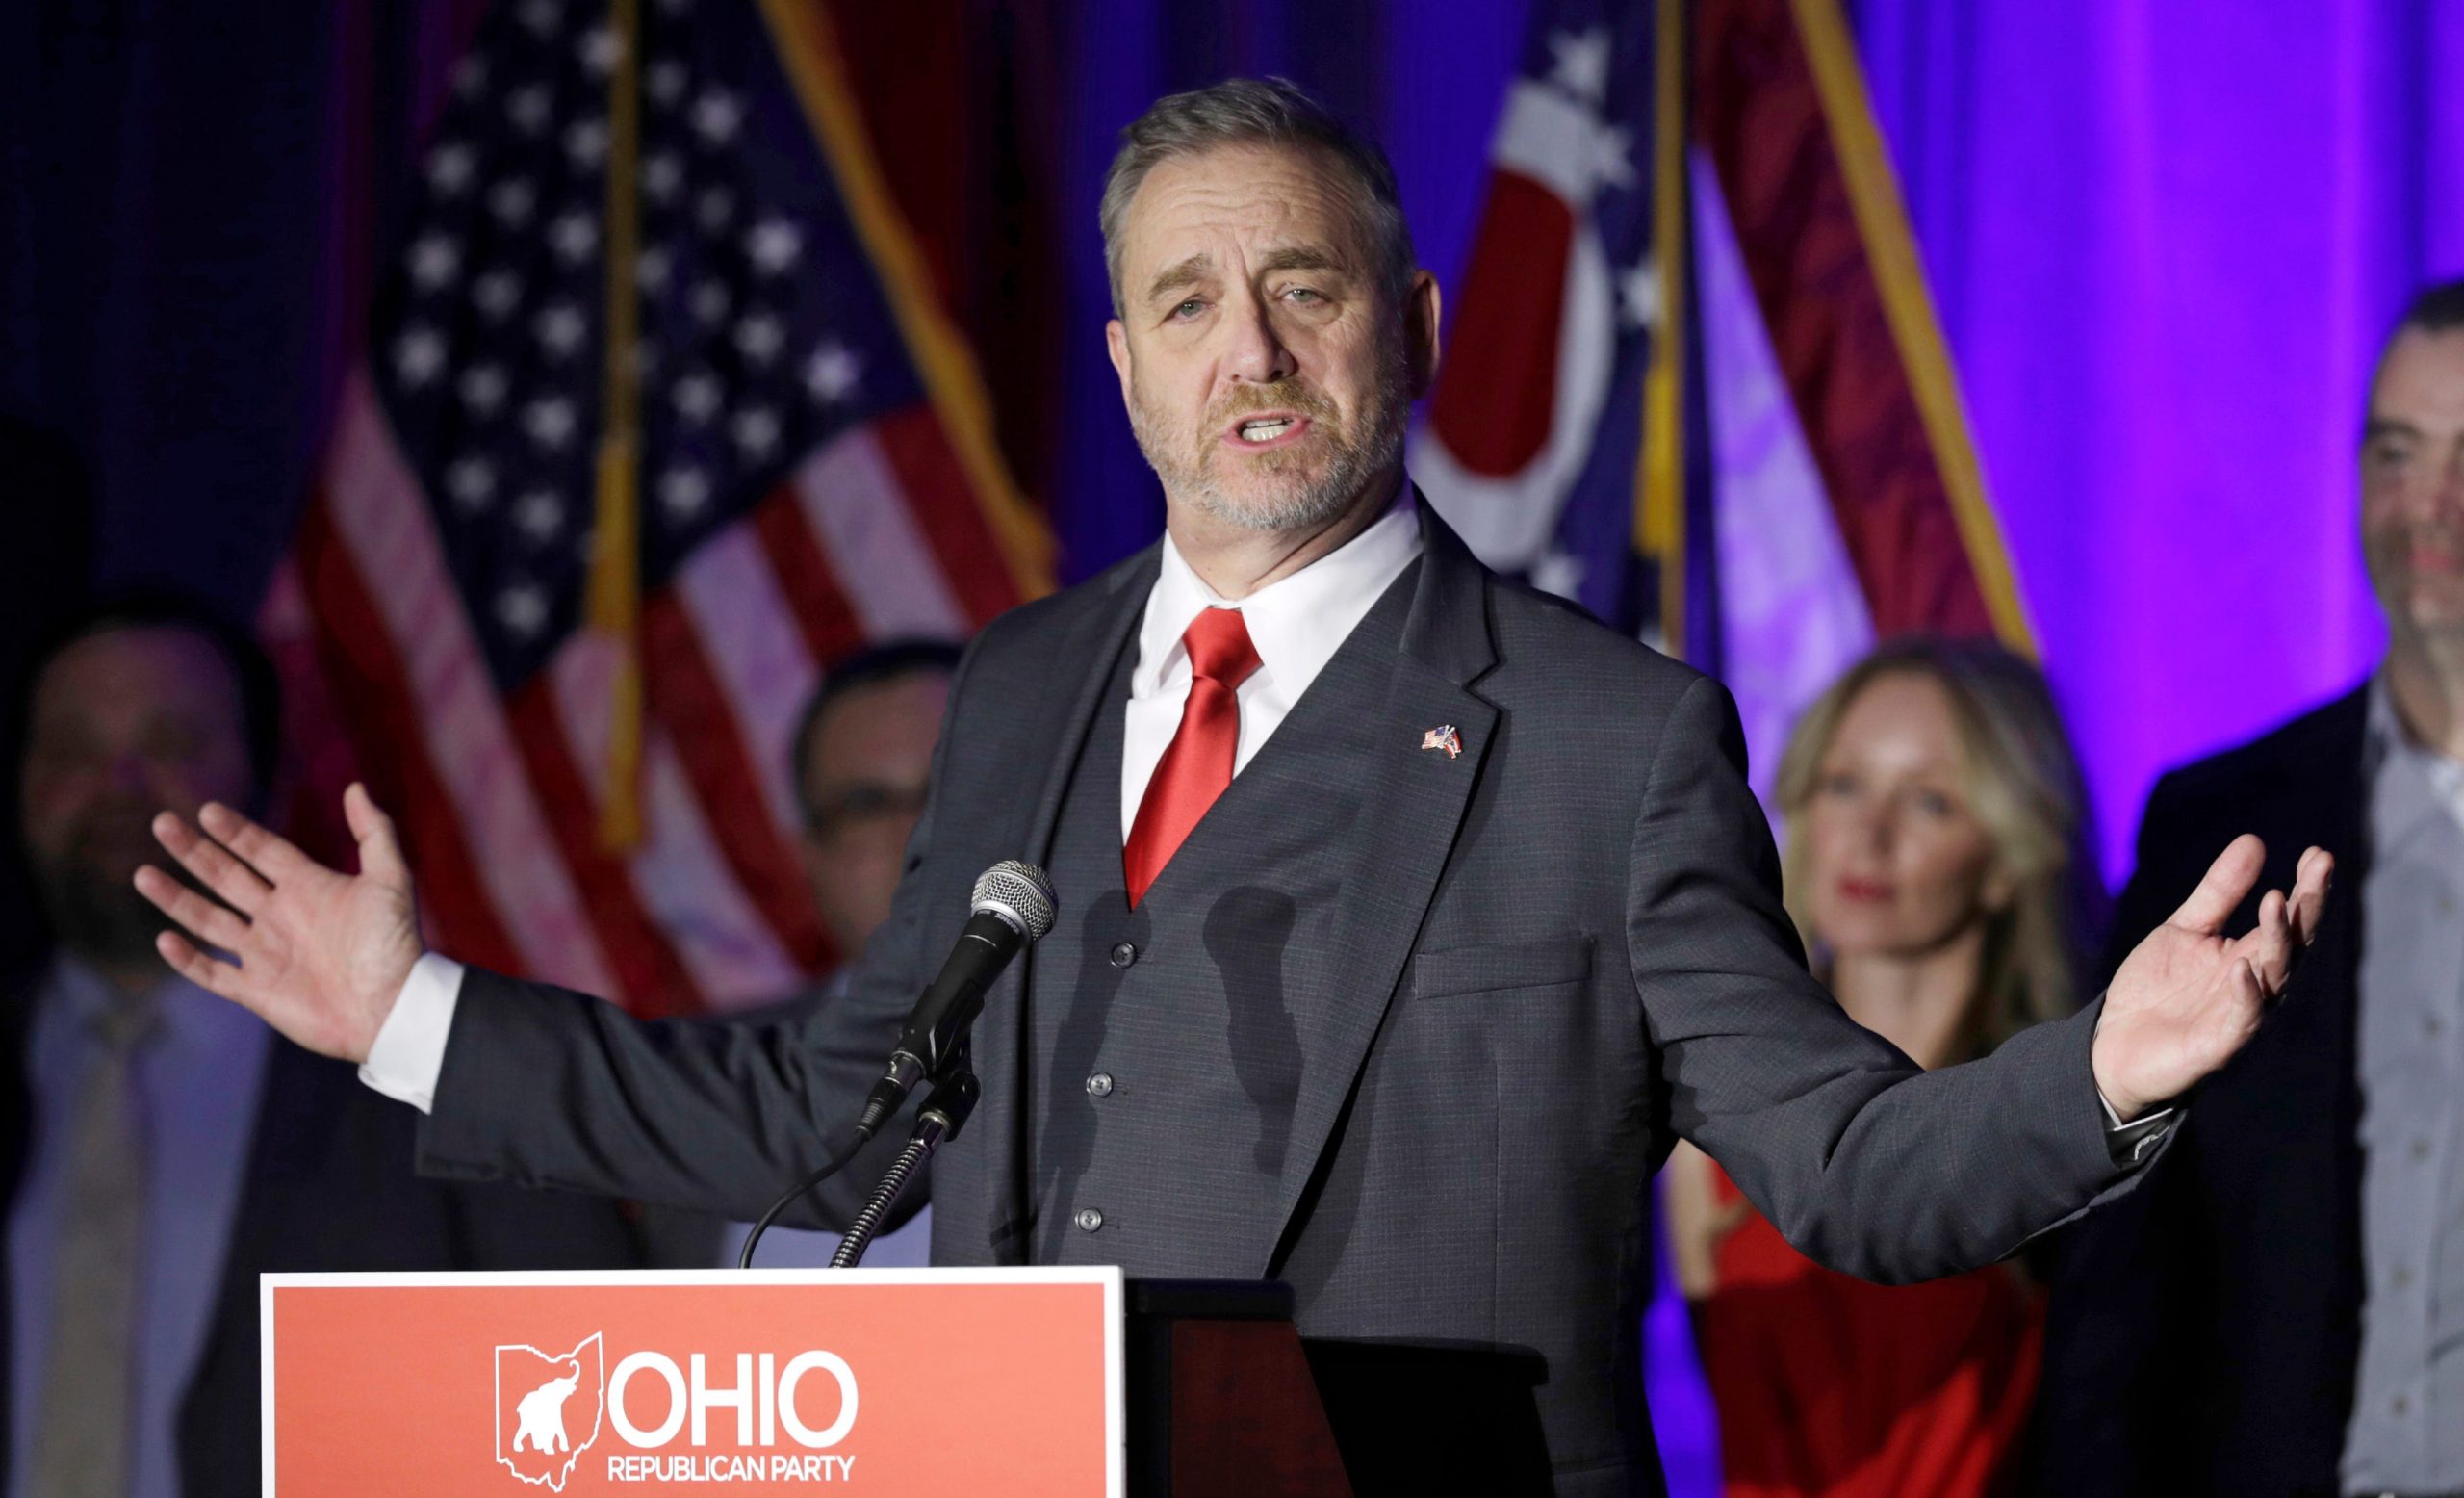 Ohio Attorney General Dave Yost in a suit raises his arms as he speaks to a crowd